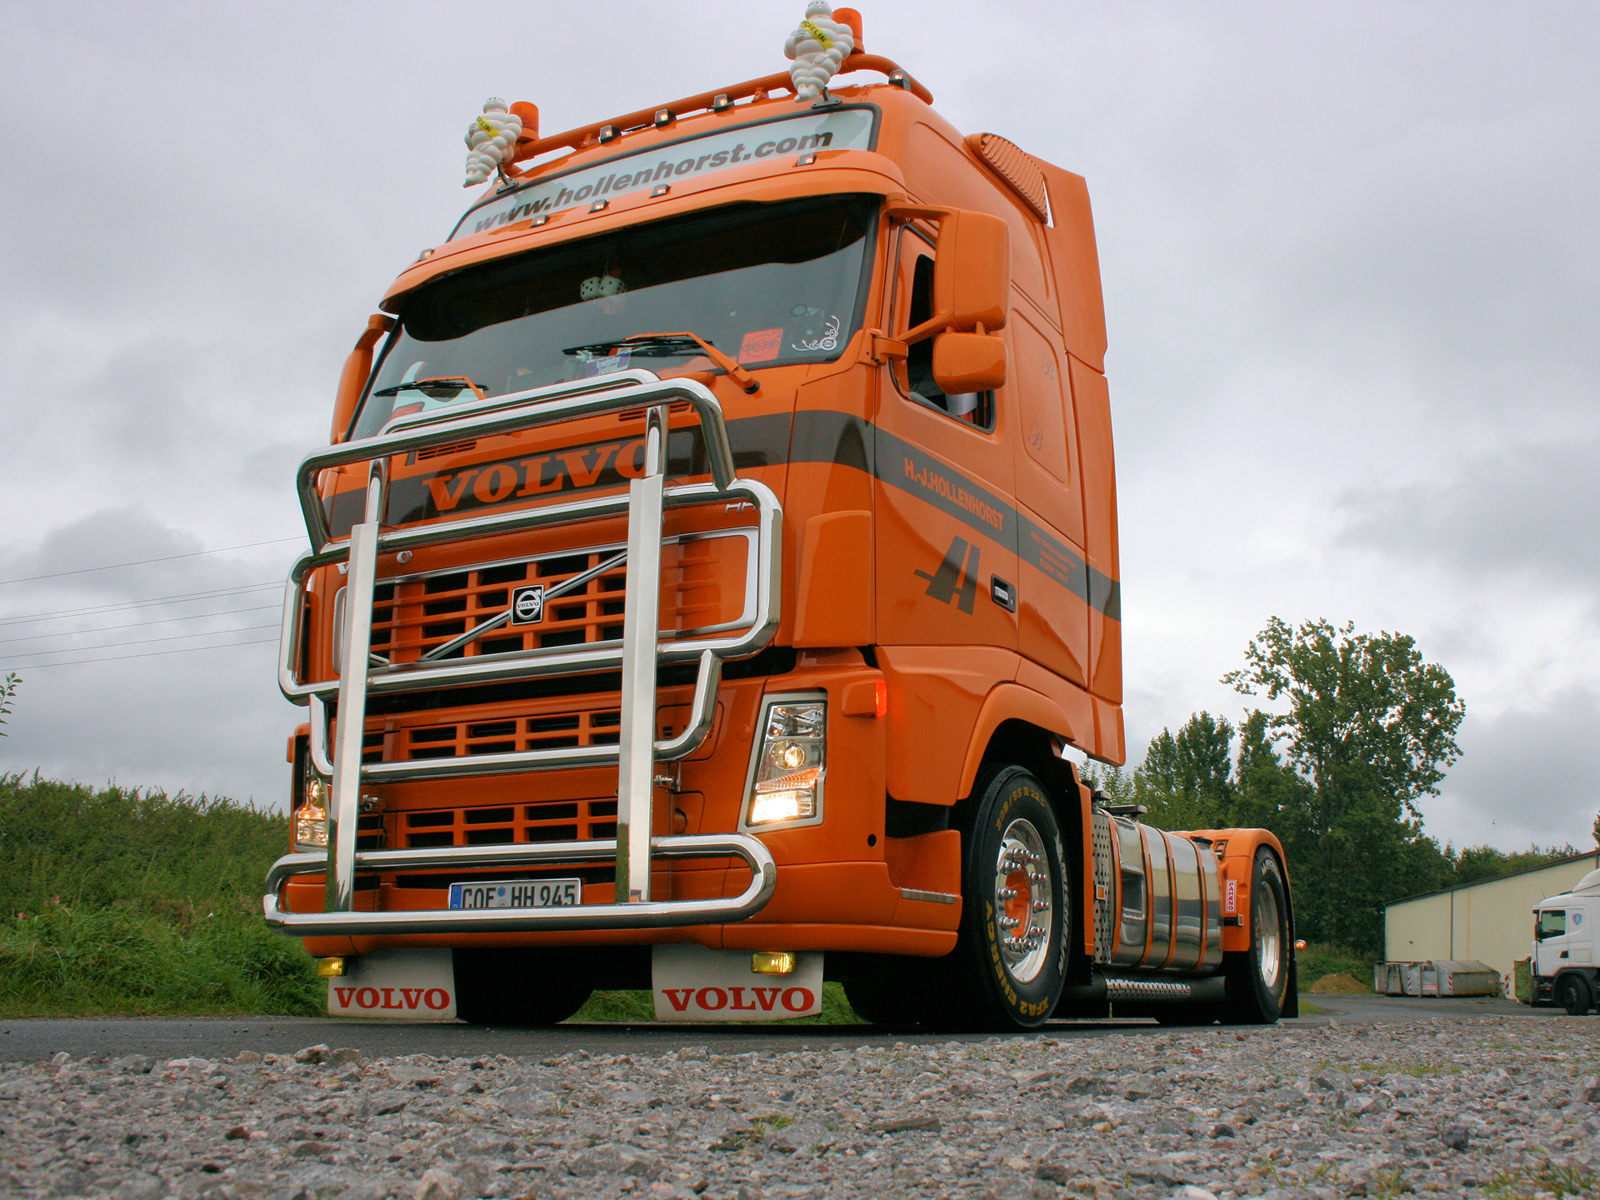 You can vote for this Volvo FH12 photo